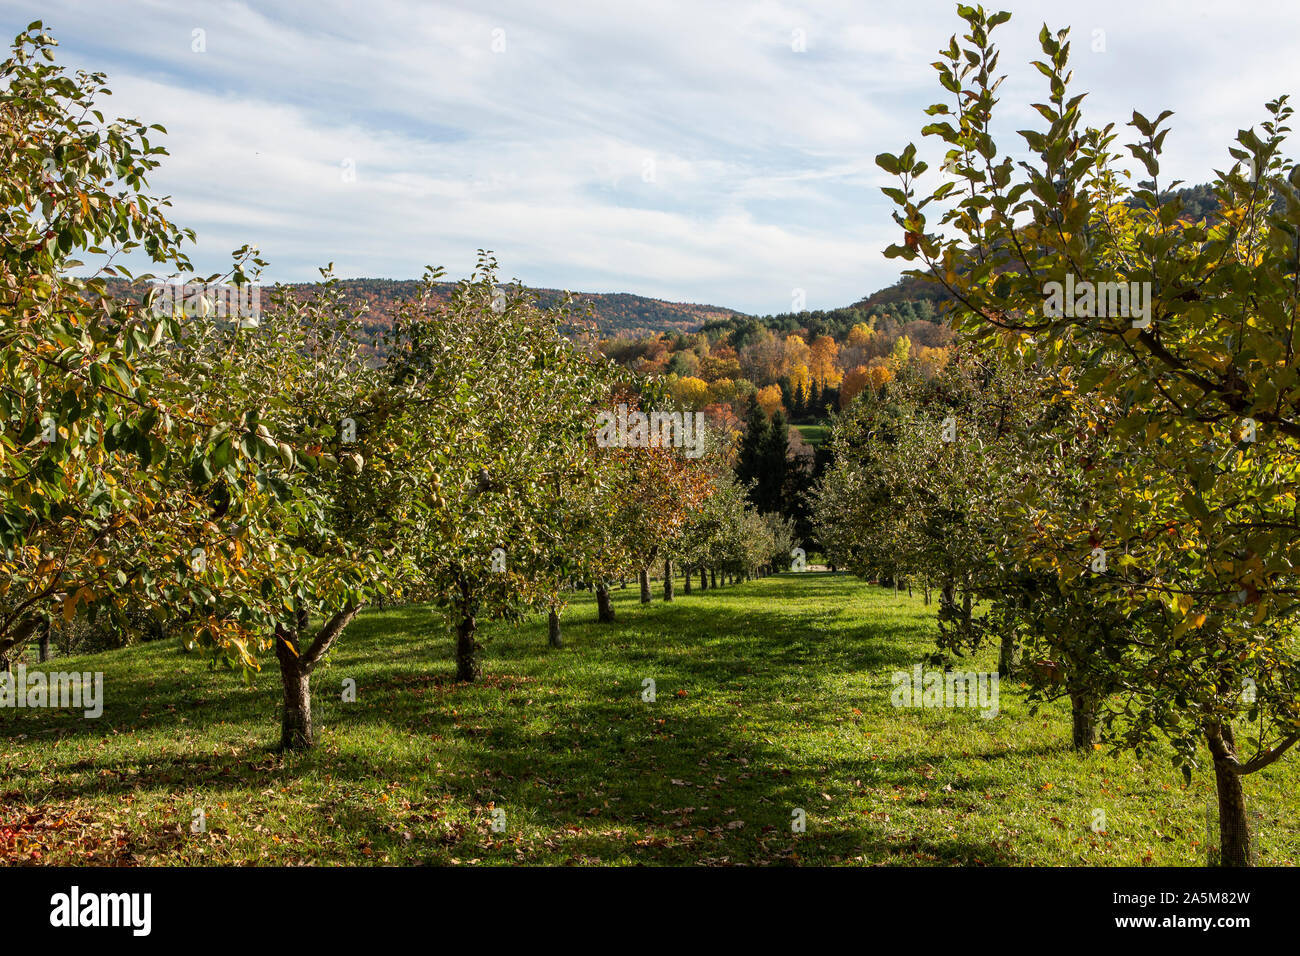 Apple trees line an orchard in Quechee, Vermont. Stock Photo